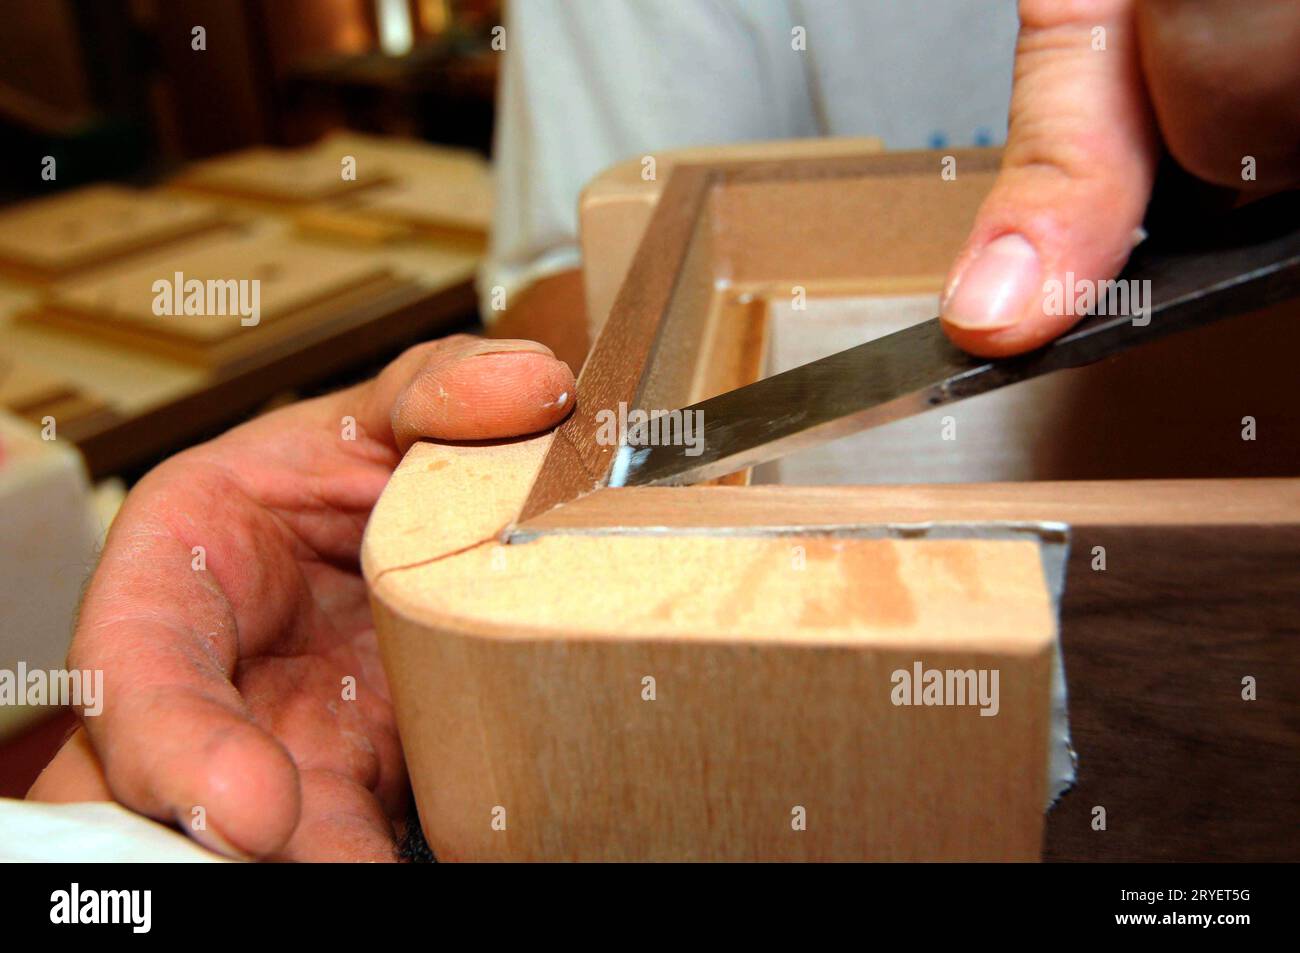 Chiseling wood in the carpentry Stock Photo